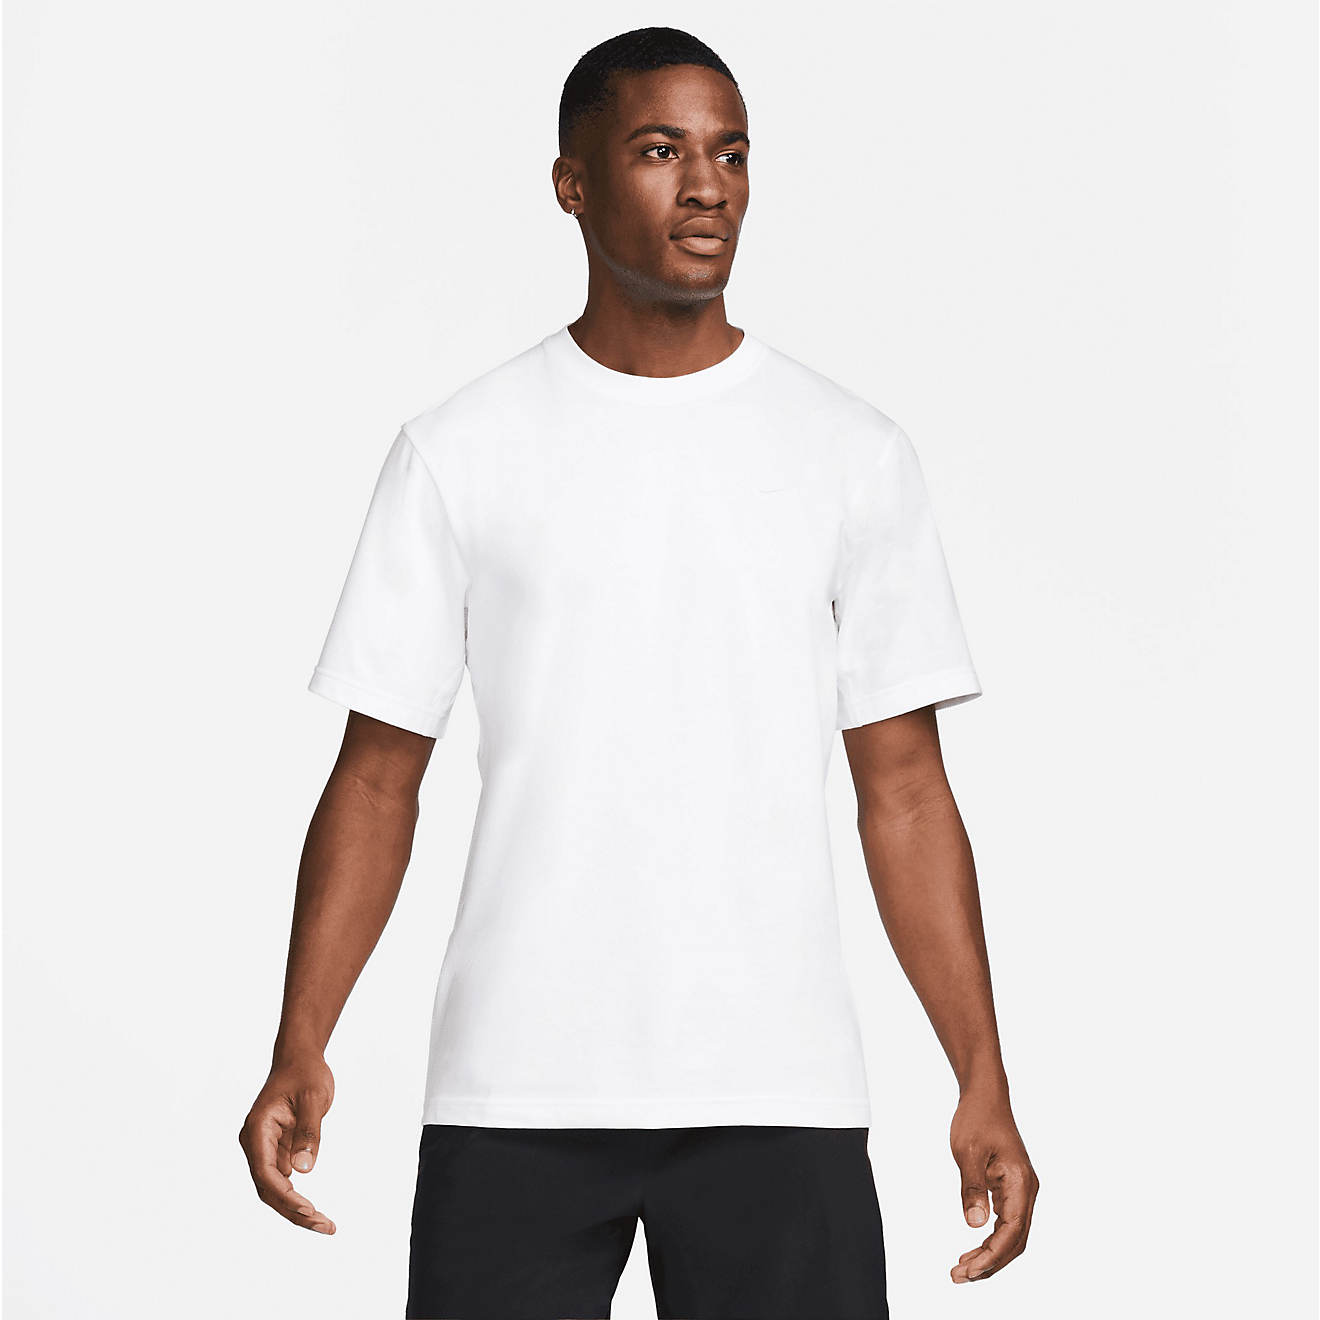 Nike Men's Primary STMT T-shirt | Free Shipping at Academy